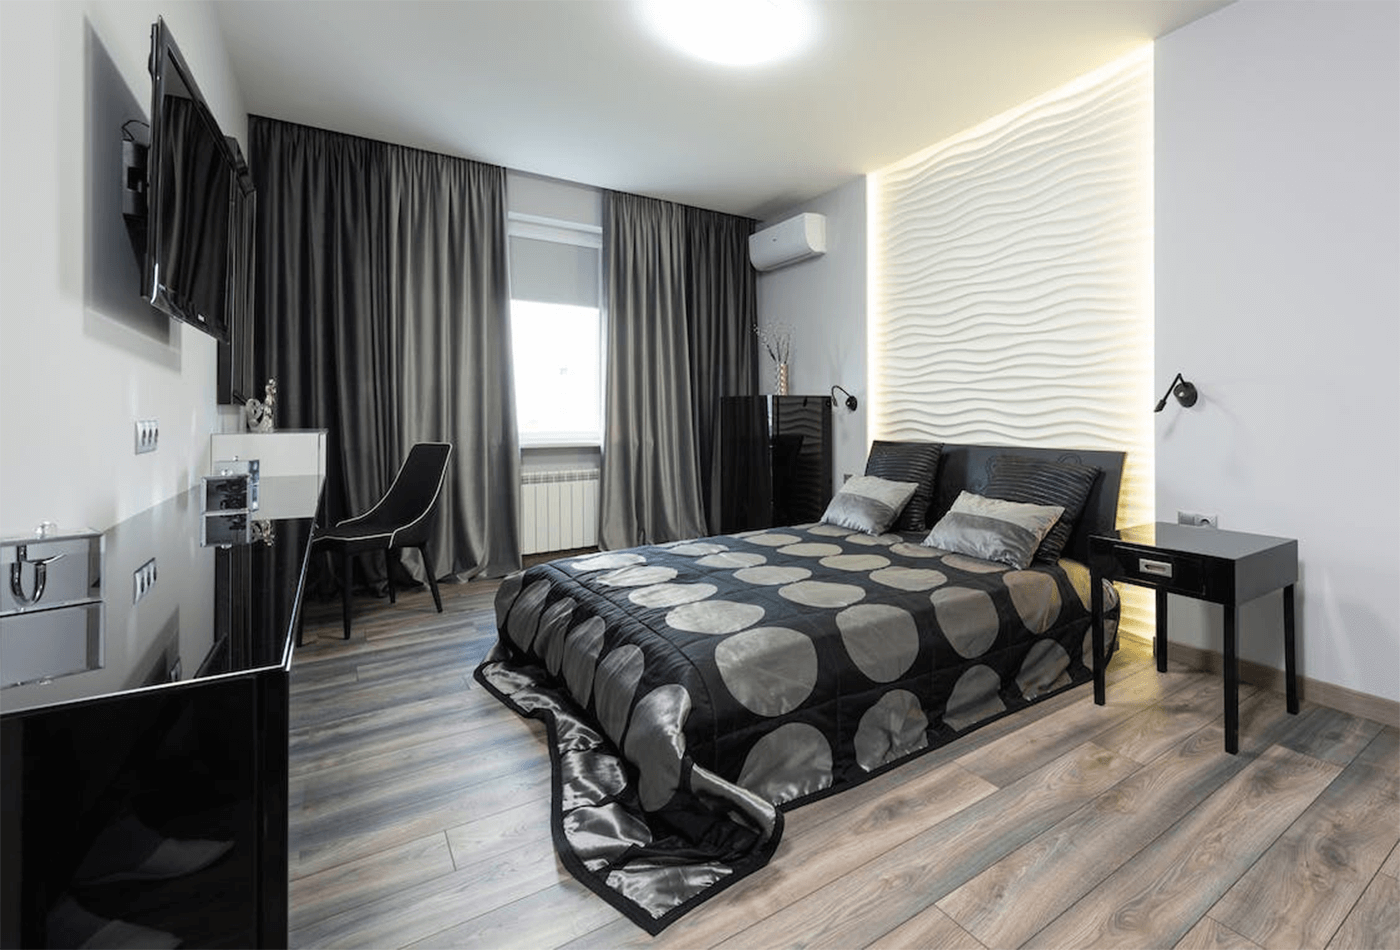 5 Striking Black and White Bedroom for Stylish Appearance!